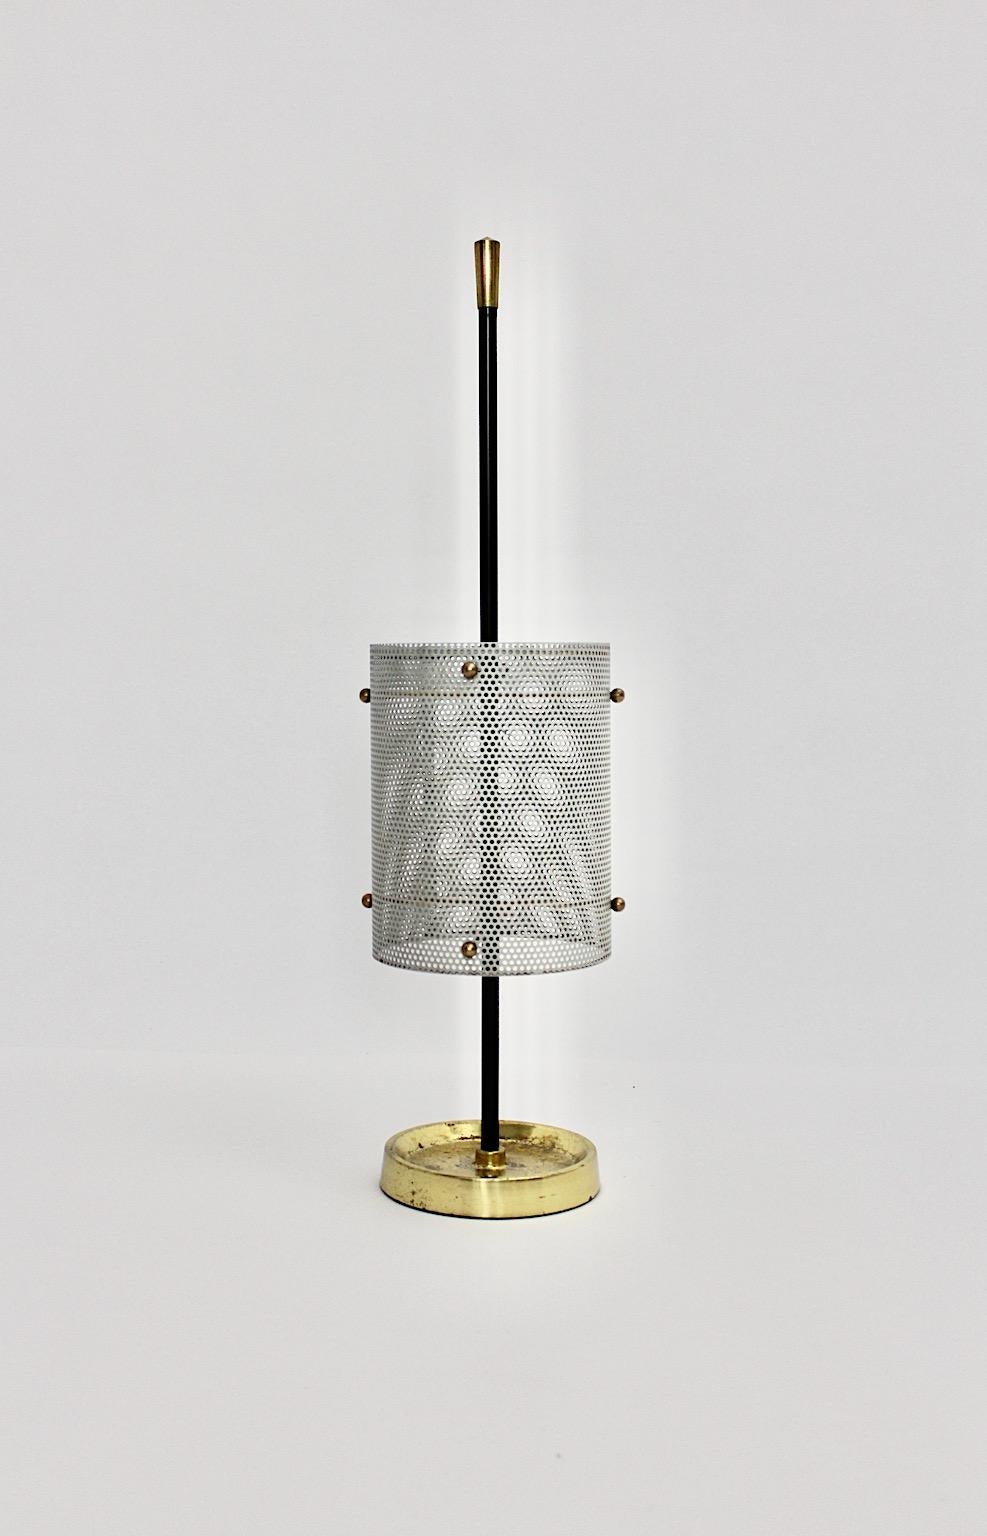 Mid-Century Modern vintage umbrella stand or cane holder from metal in soft grey color with brass details 1960s Germany.
A stunning vintage umbrella stand in cylindral shape from perforated soft grey lacquered sheet metal with brass details and